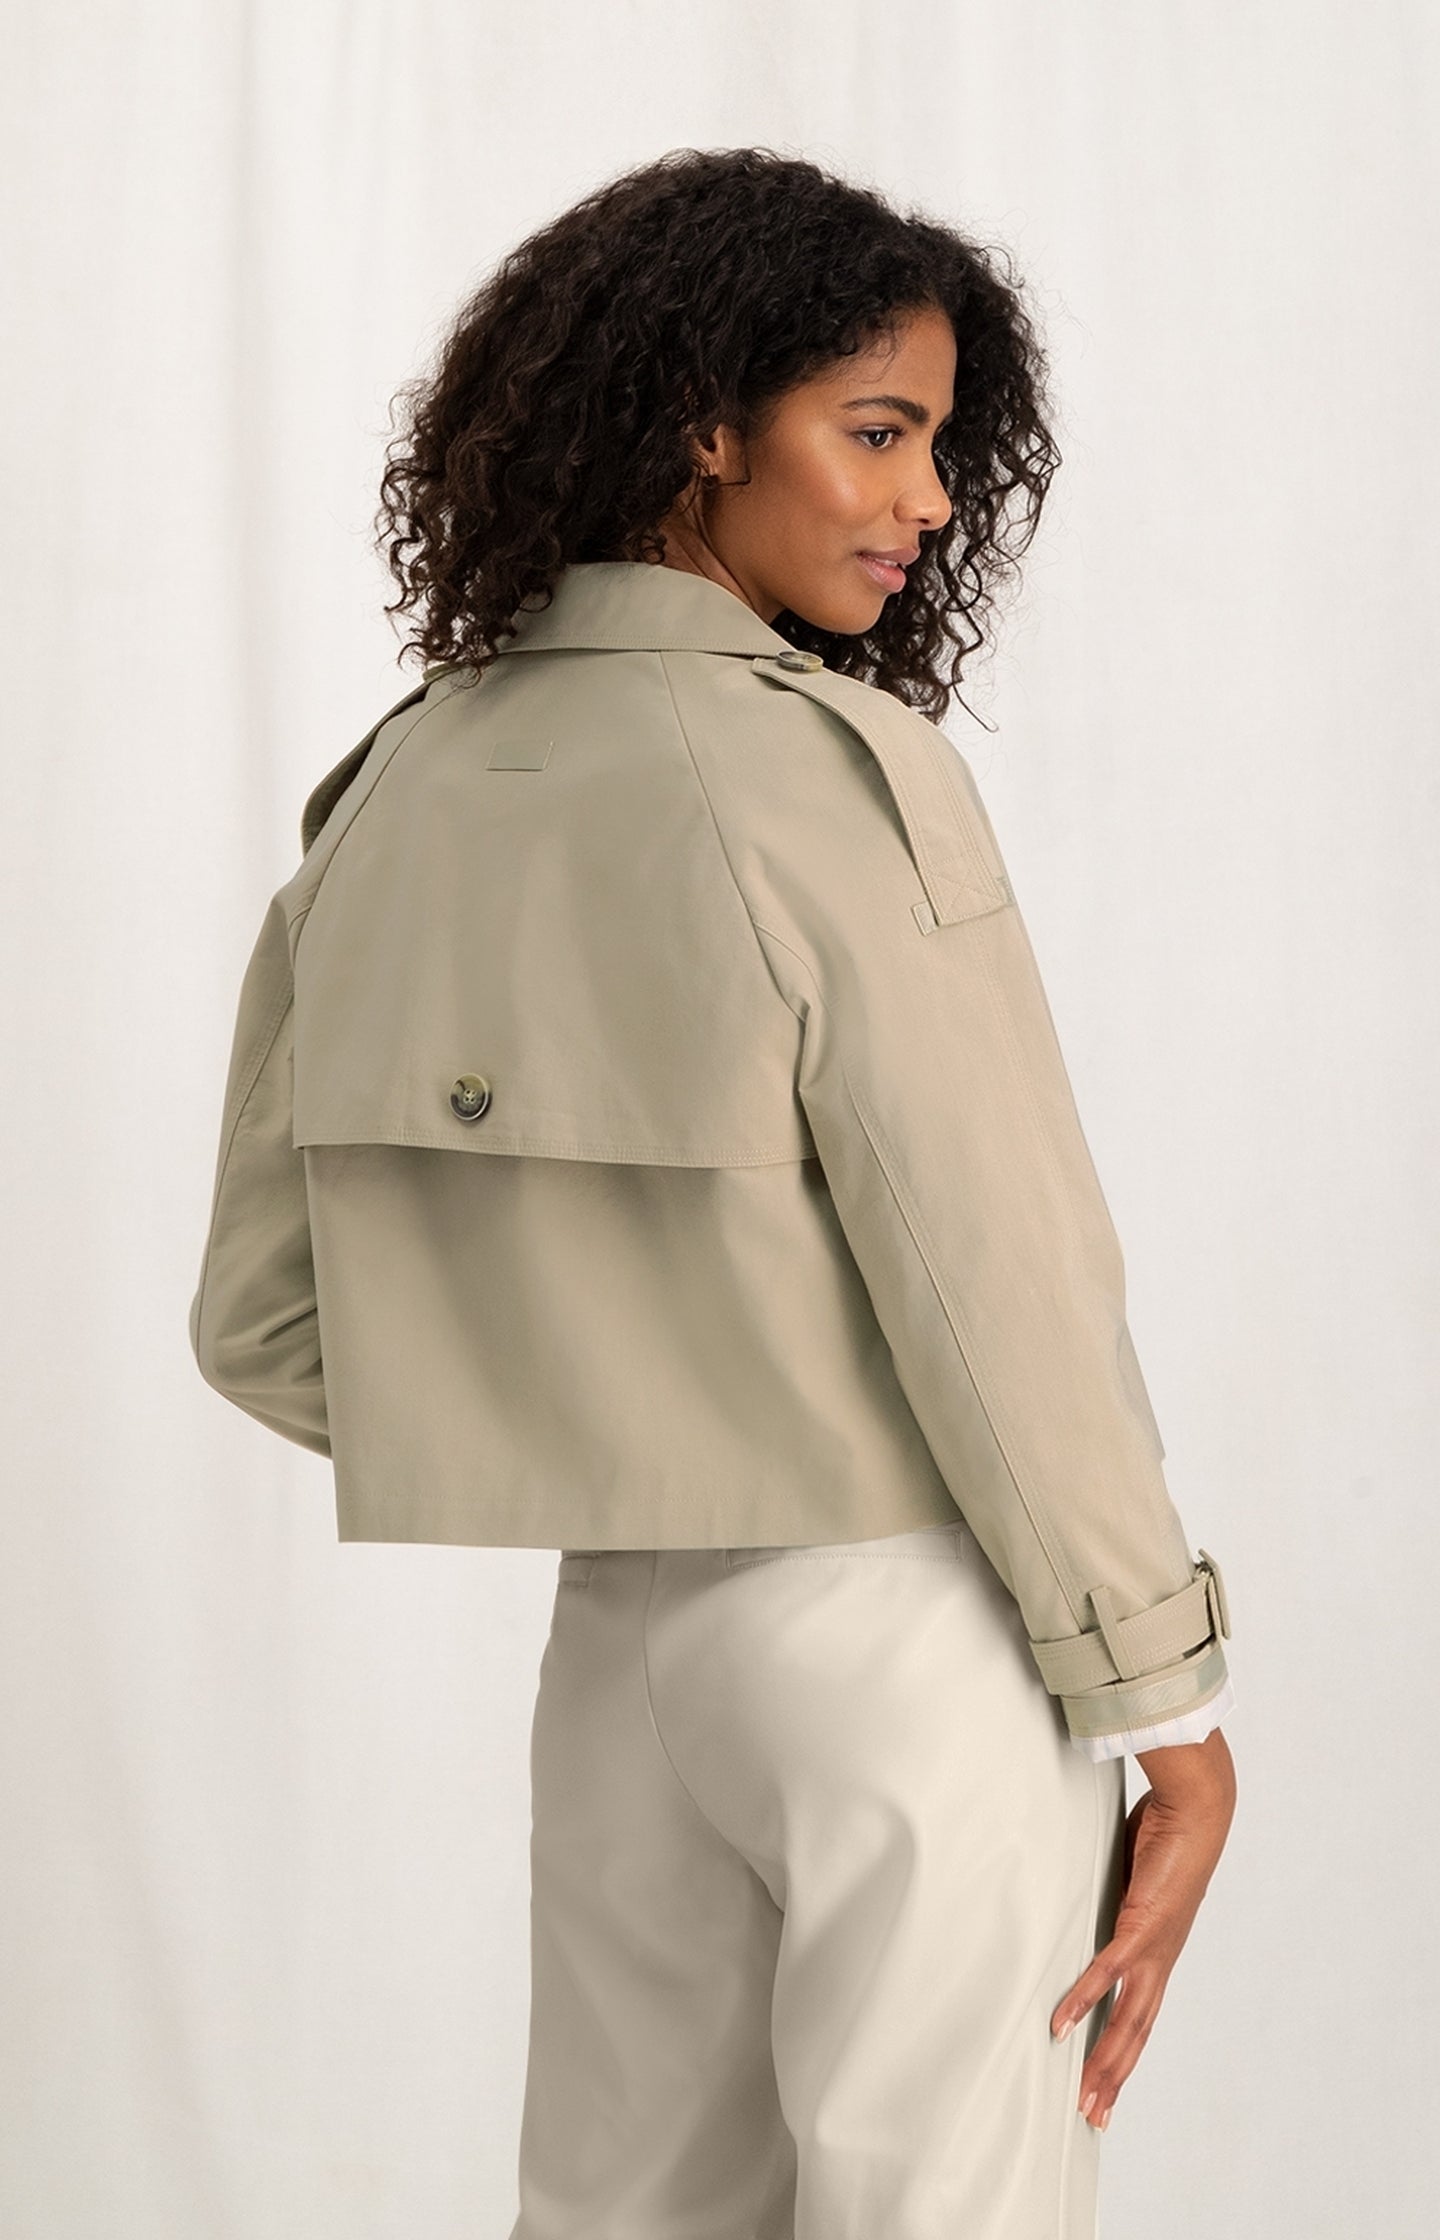 Cropped trench coat with long sleeves and shoulder details - Type: lookbook